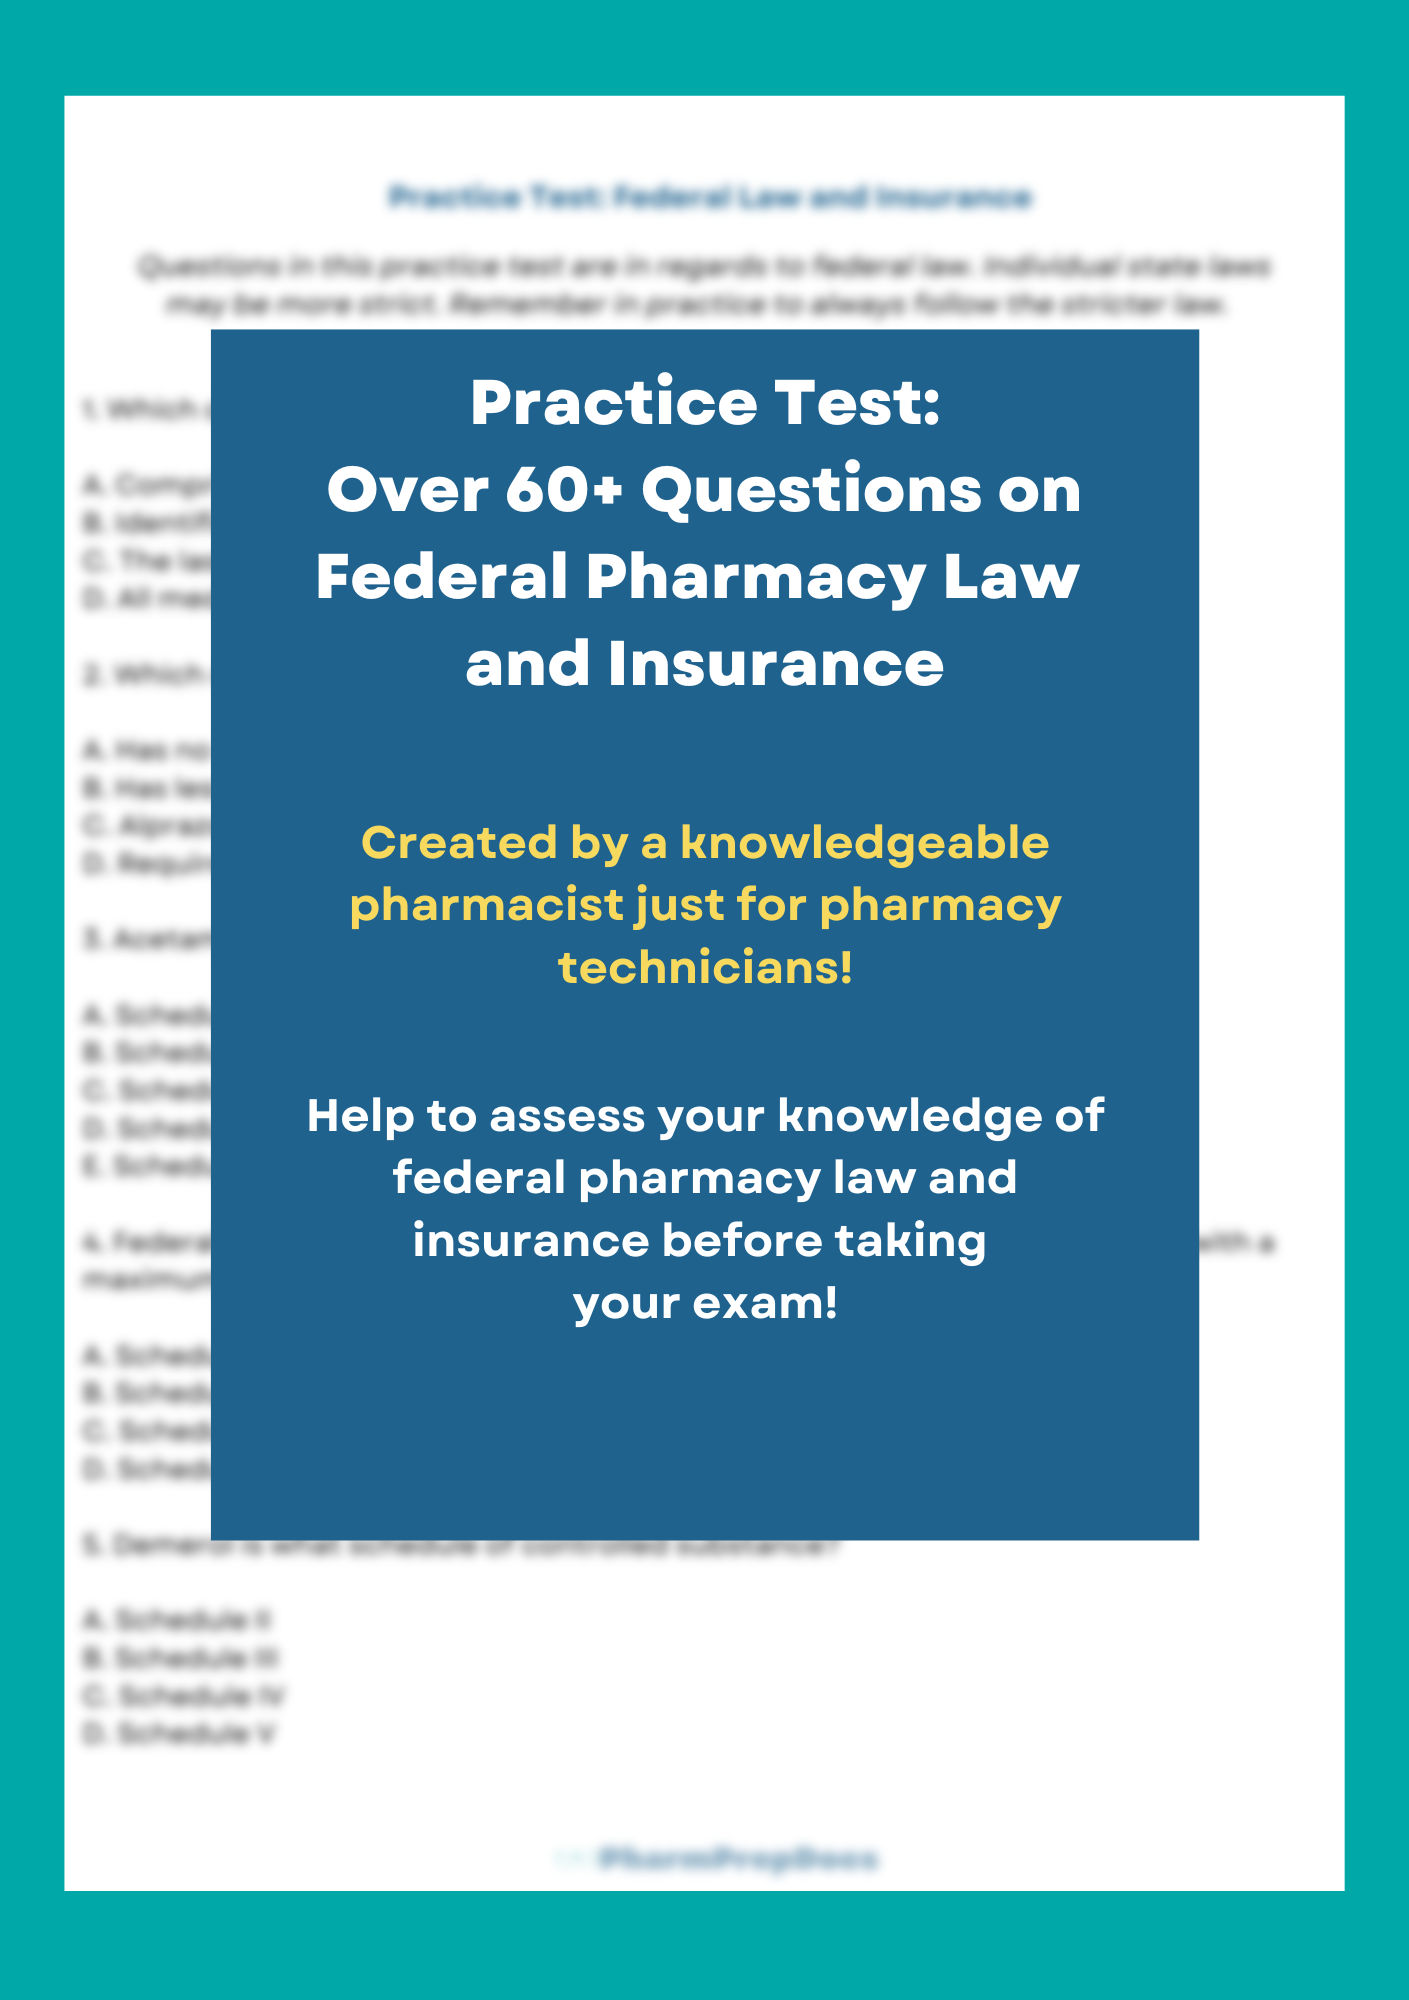 Practice Test: Federal Pharmacy Law and Insurance